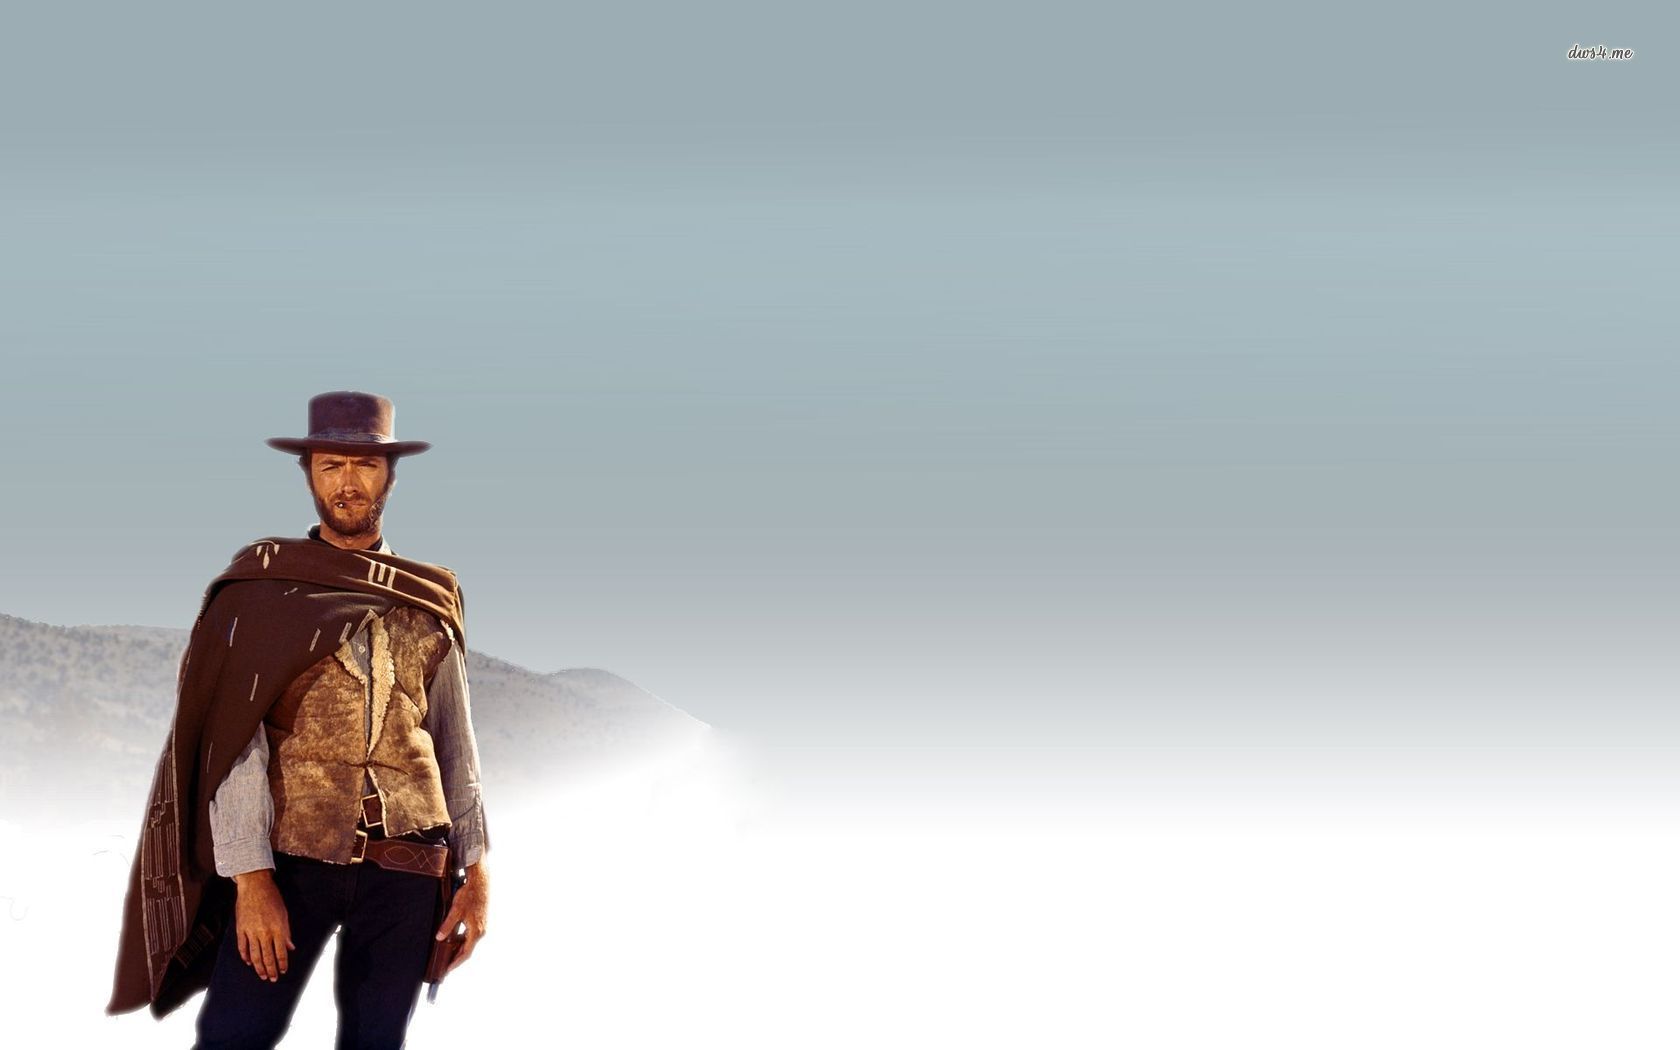 Wallpaper  3840x2160 px Clint Eastwood The Bad And The Ugly The Good  western 3840x2160  CoolWallpapers  1251319  HD Wallpapers  WallHere